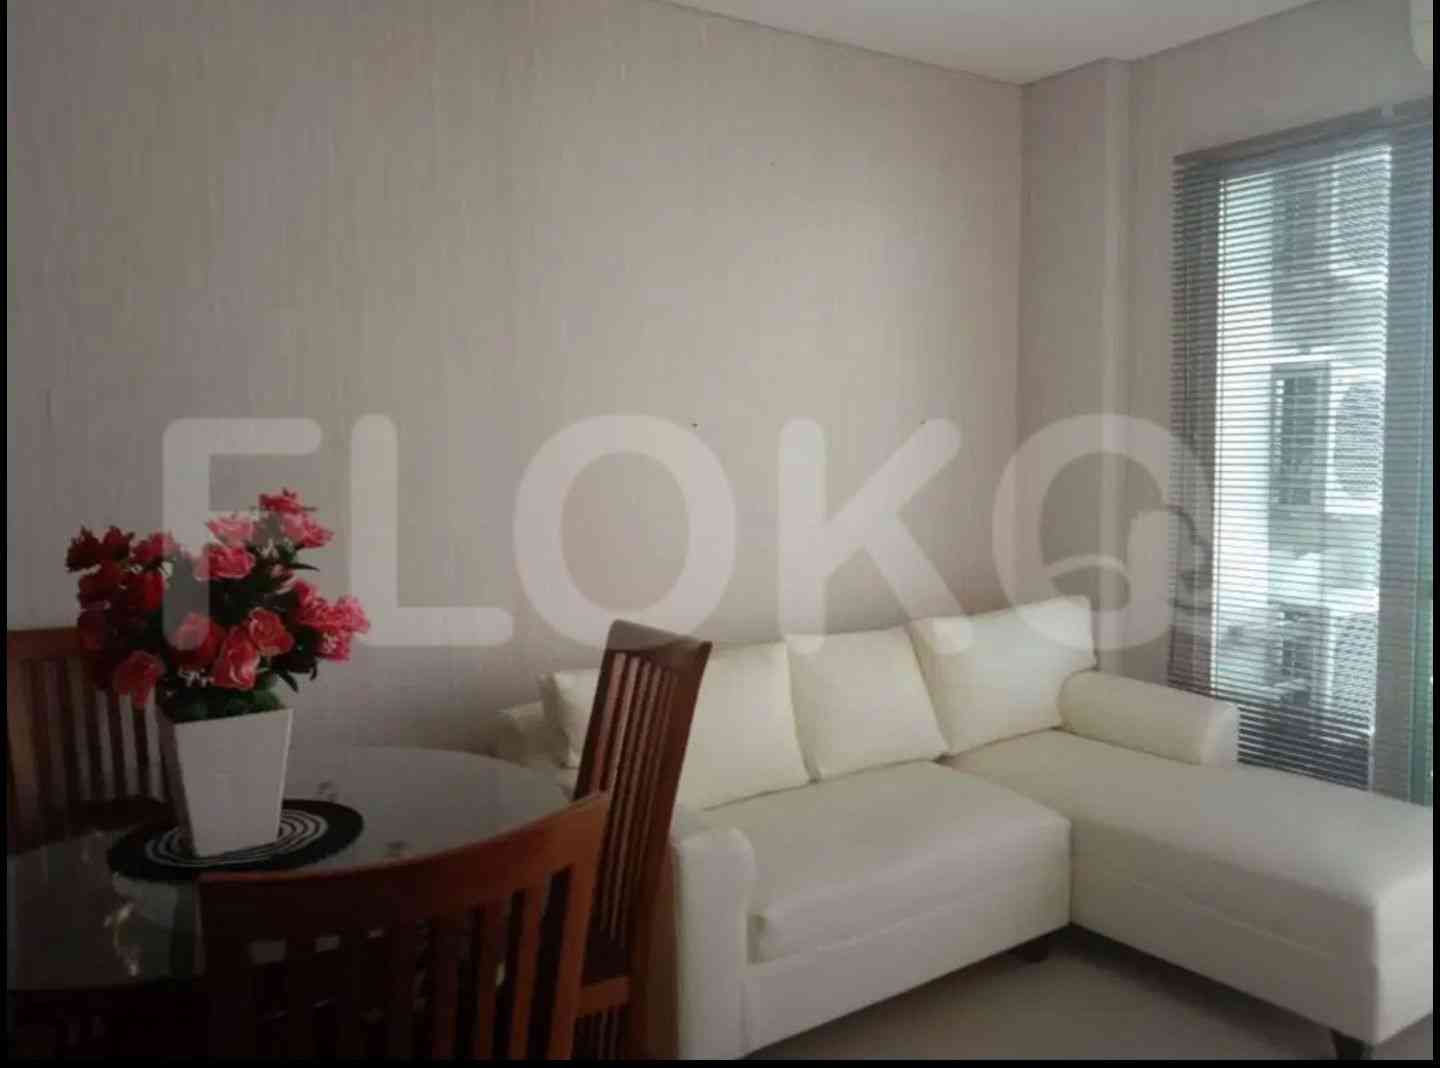 2 Bedroom on 21st Floor for Rent in Thamrin Residence Apartment - fth6d8 1